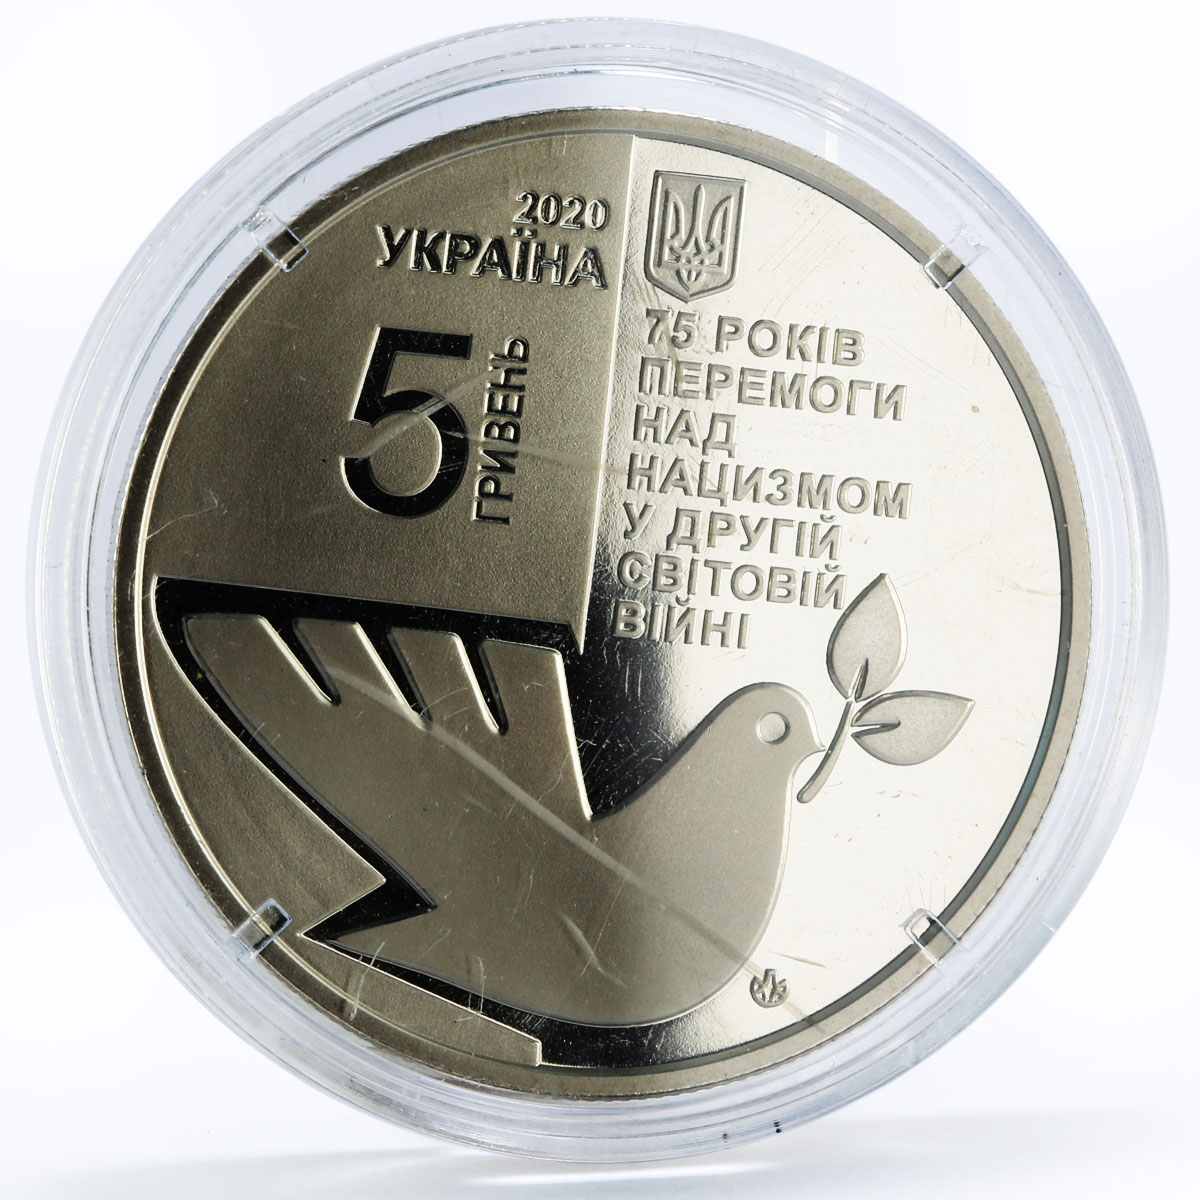 Ukraine 5 hryvnias 75th Anniversary of the Victory in WWII nickel coin 2020